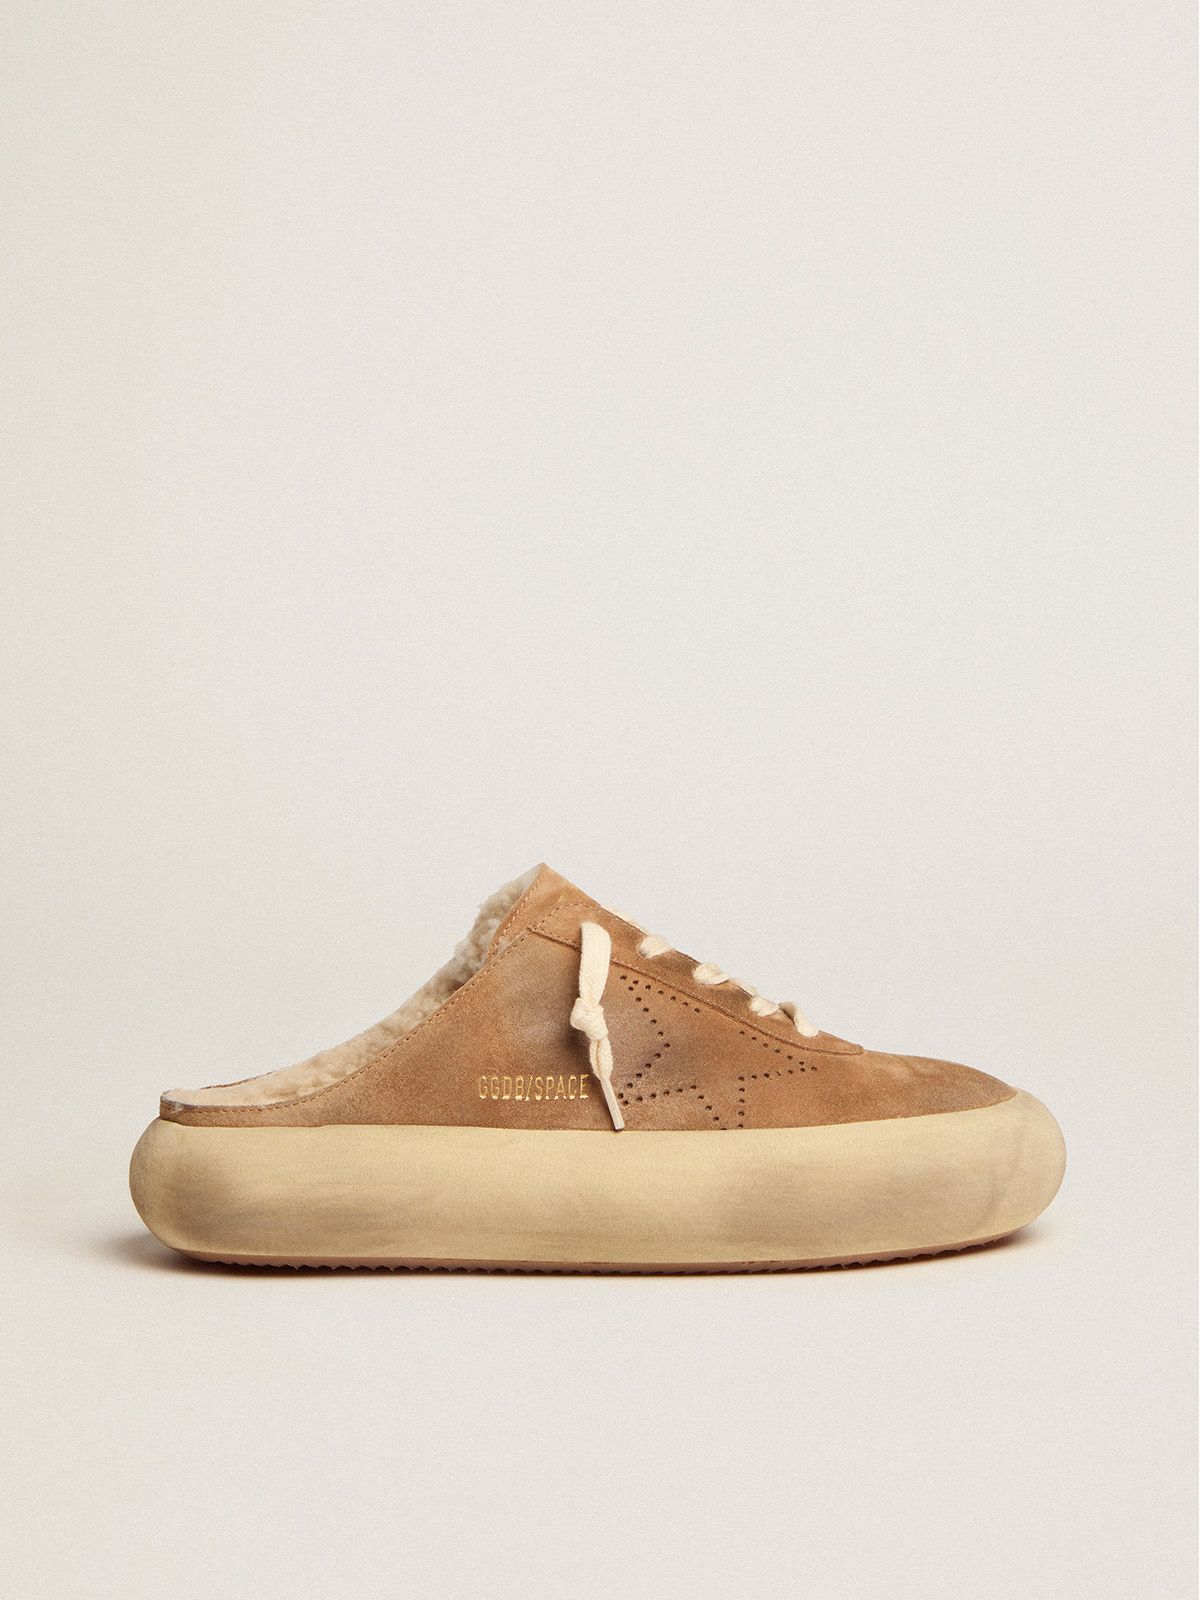 golden goose in shearling suede shoes with Space-Star lining tobacco-colored Sabot